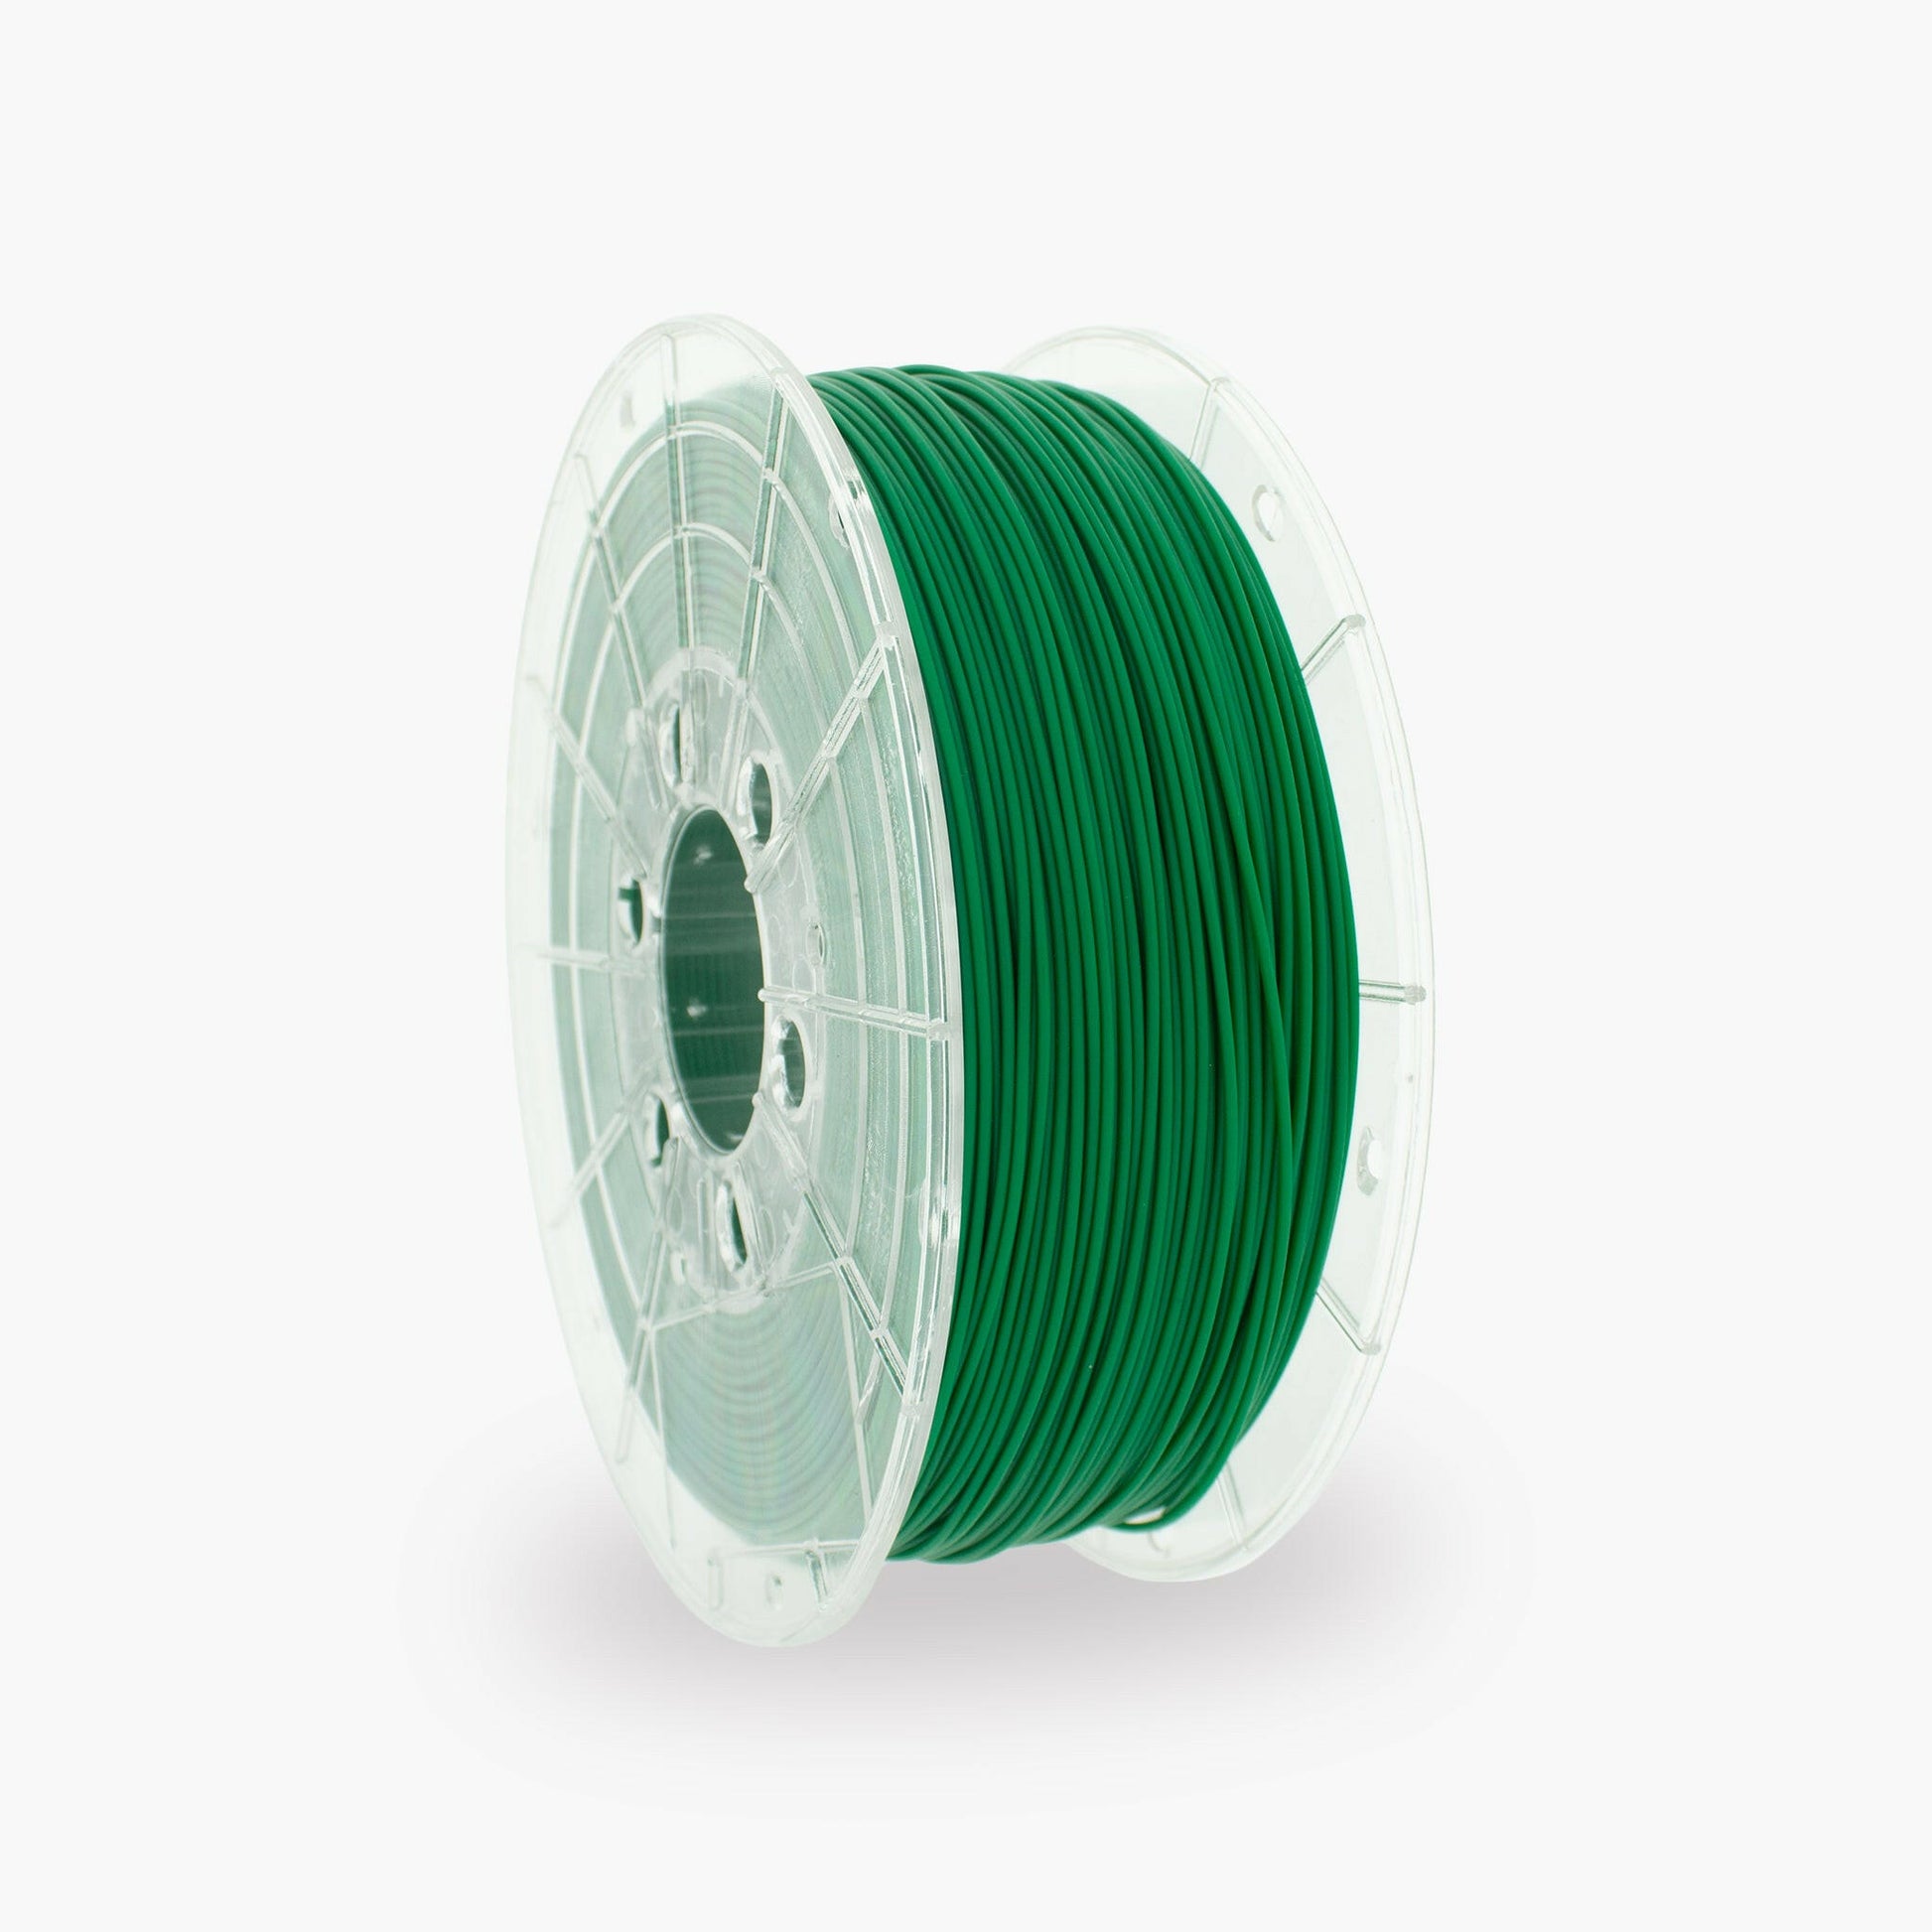 Turquoise Green PLA 3D Printer Filament with a diameter of 1.75mm on a 1KG Spool.